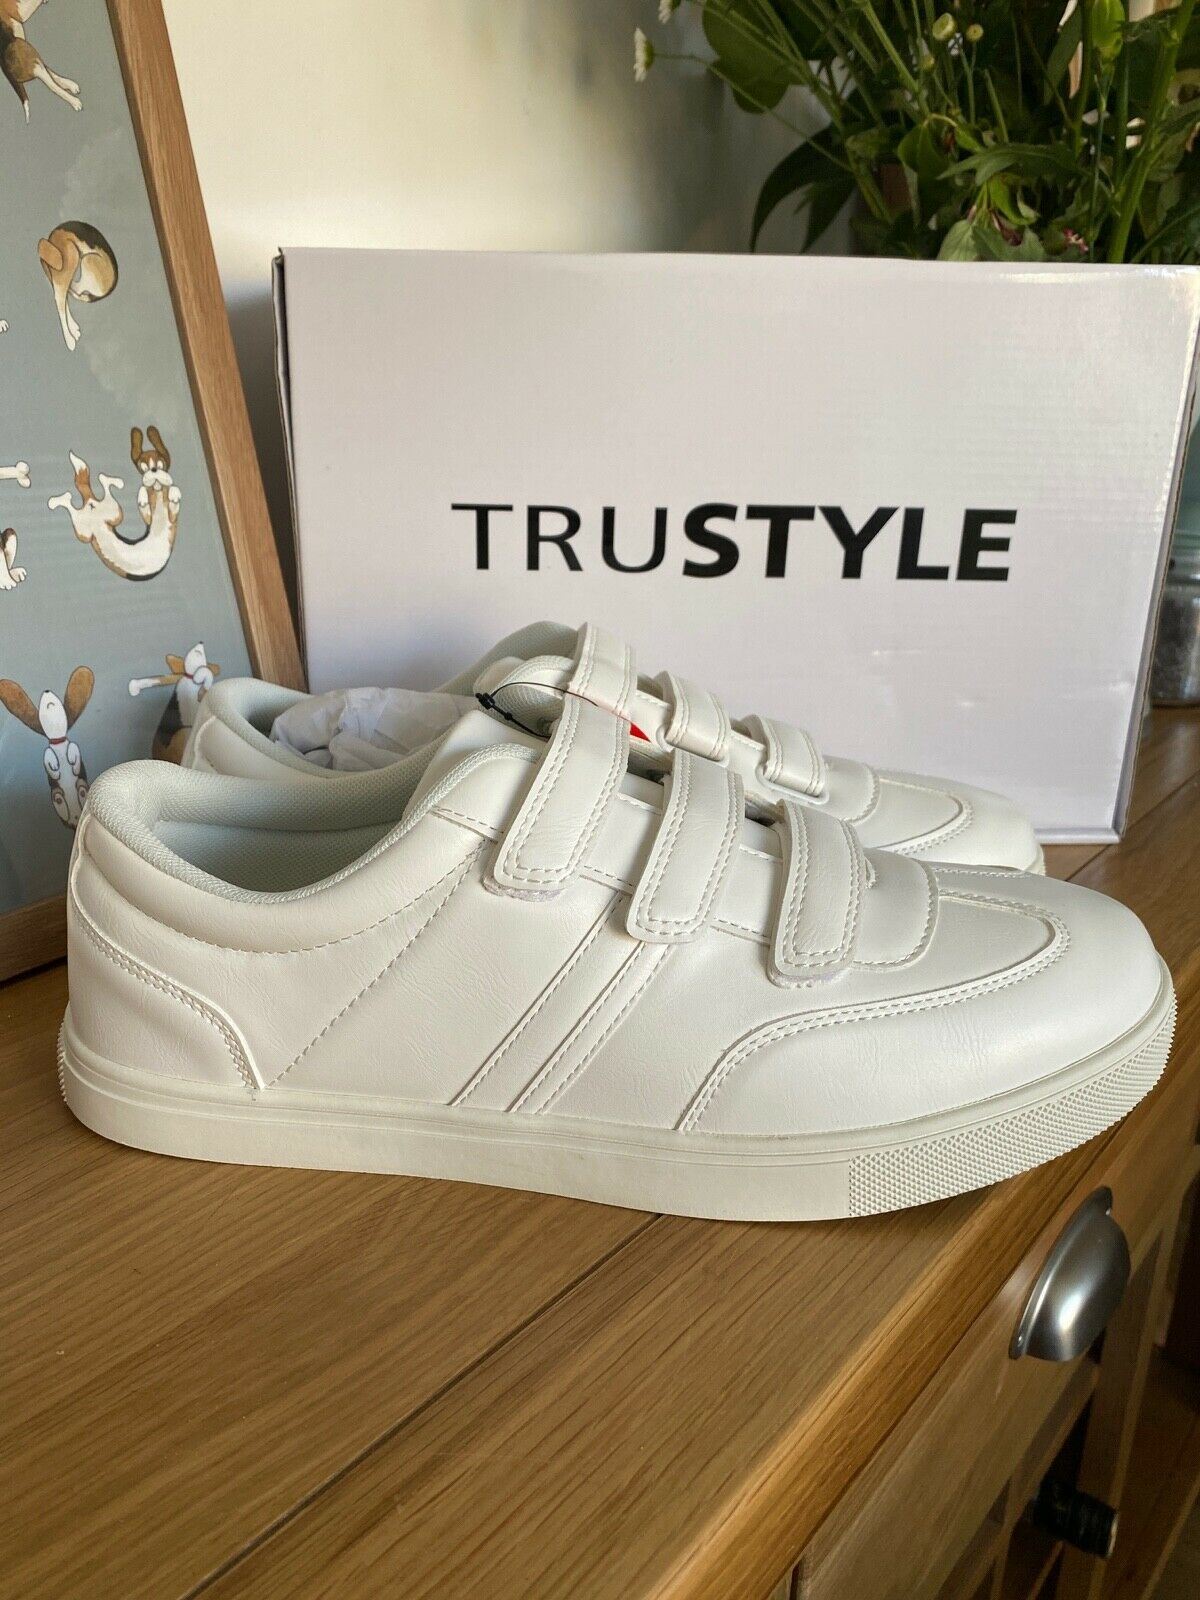 Trustyle Men's Trainer Tennis Type Available in Blue or White